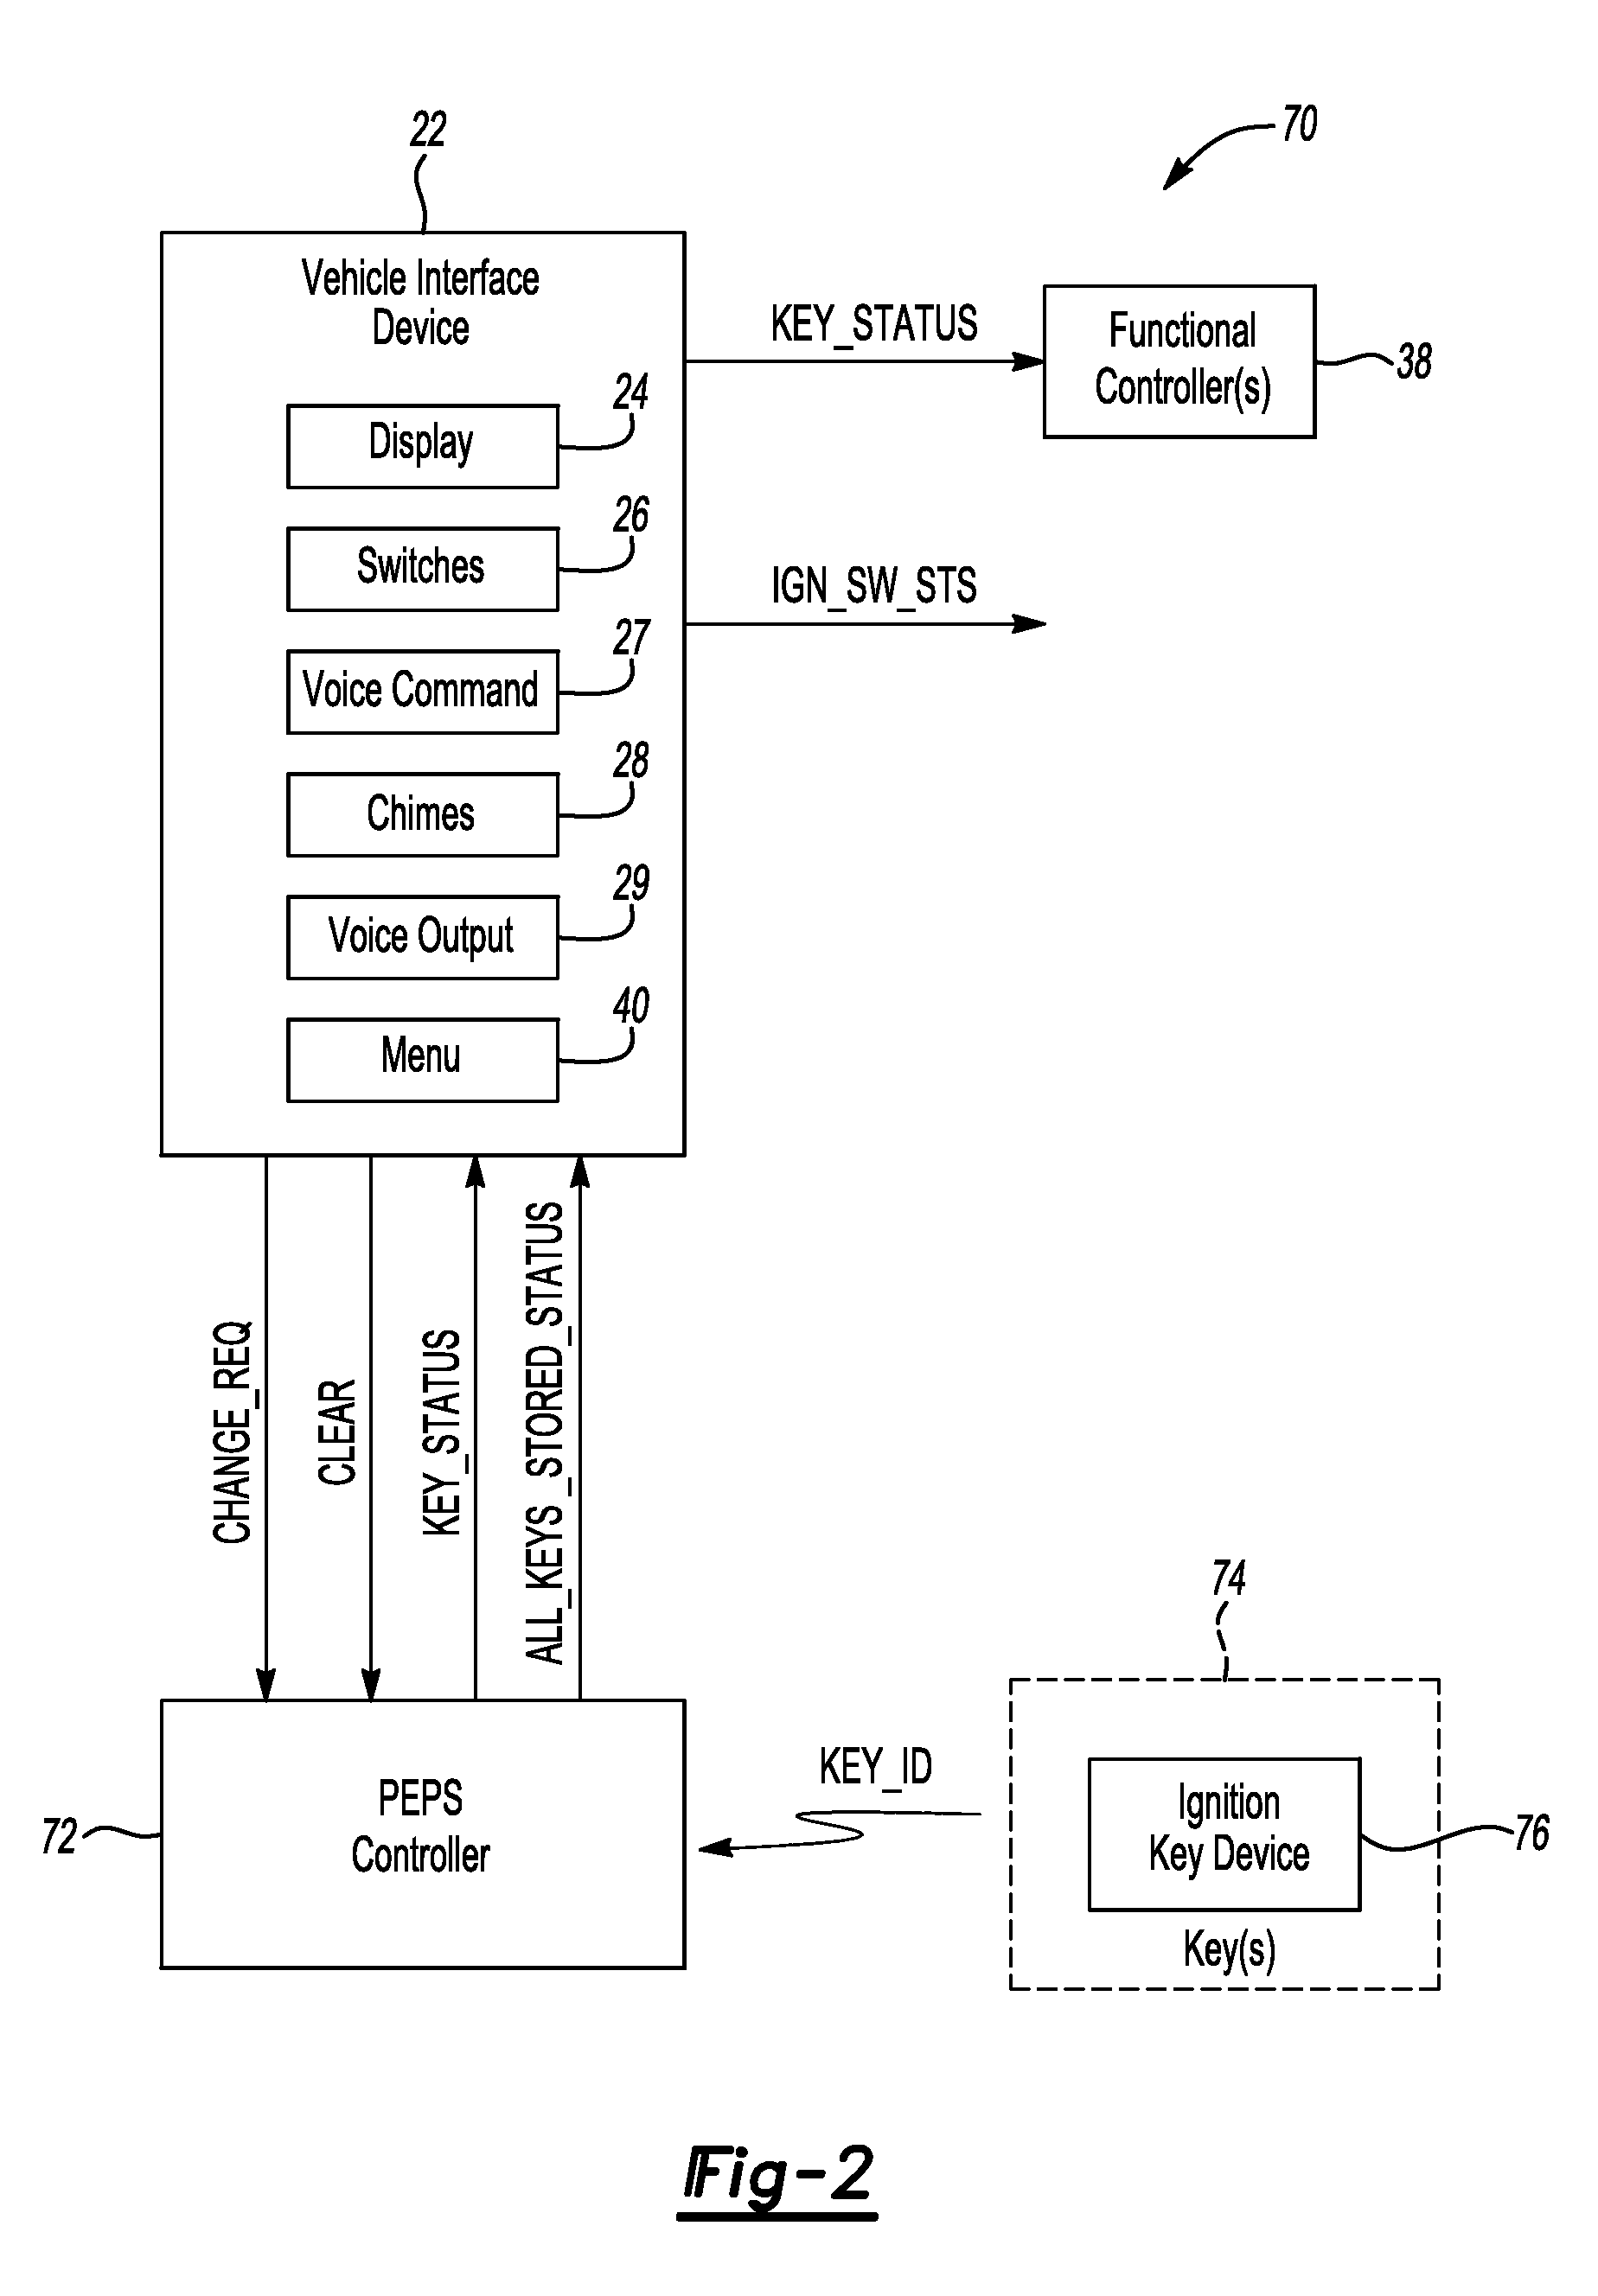 System and method for changing key status in a vehicle based on driver status